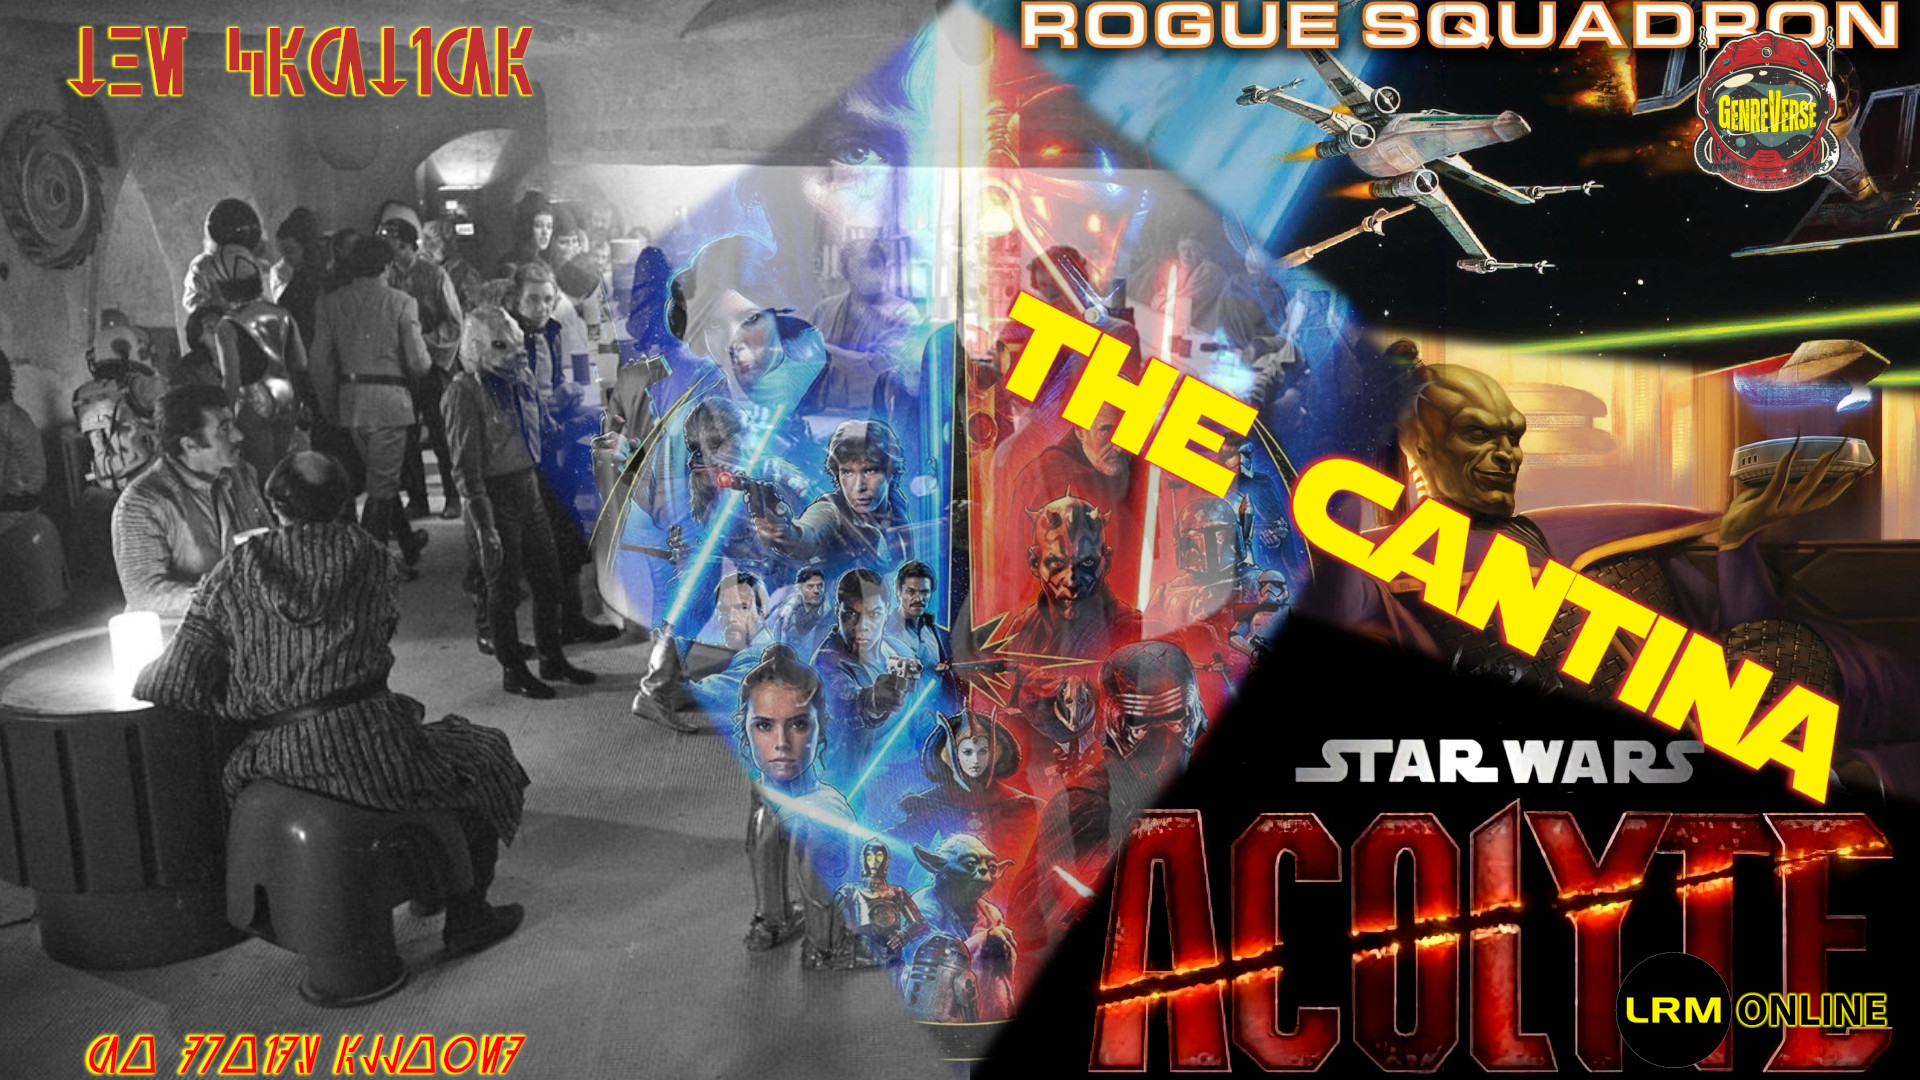 Rogue Squadron Update: It May Be Back On Track, Prince Xizor Is Canon Again, The Acolyte Casts Amandla Stenberg | The Cantina